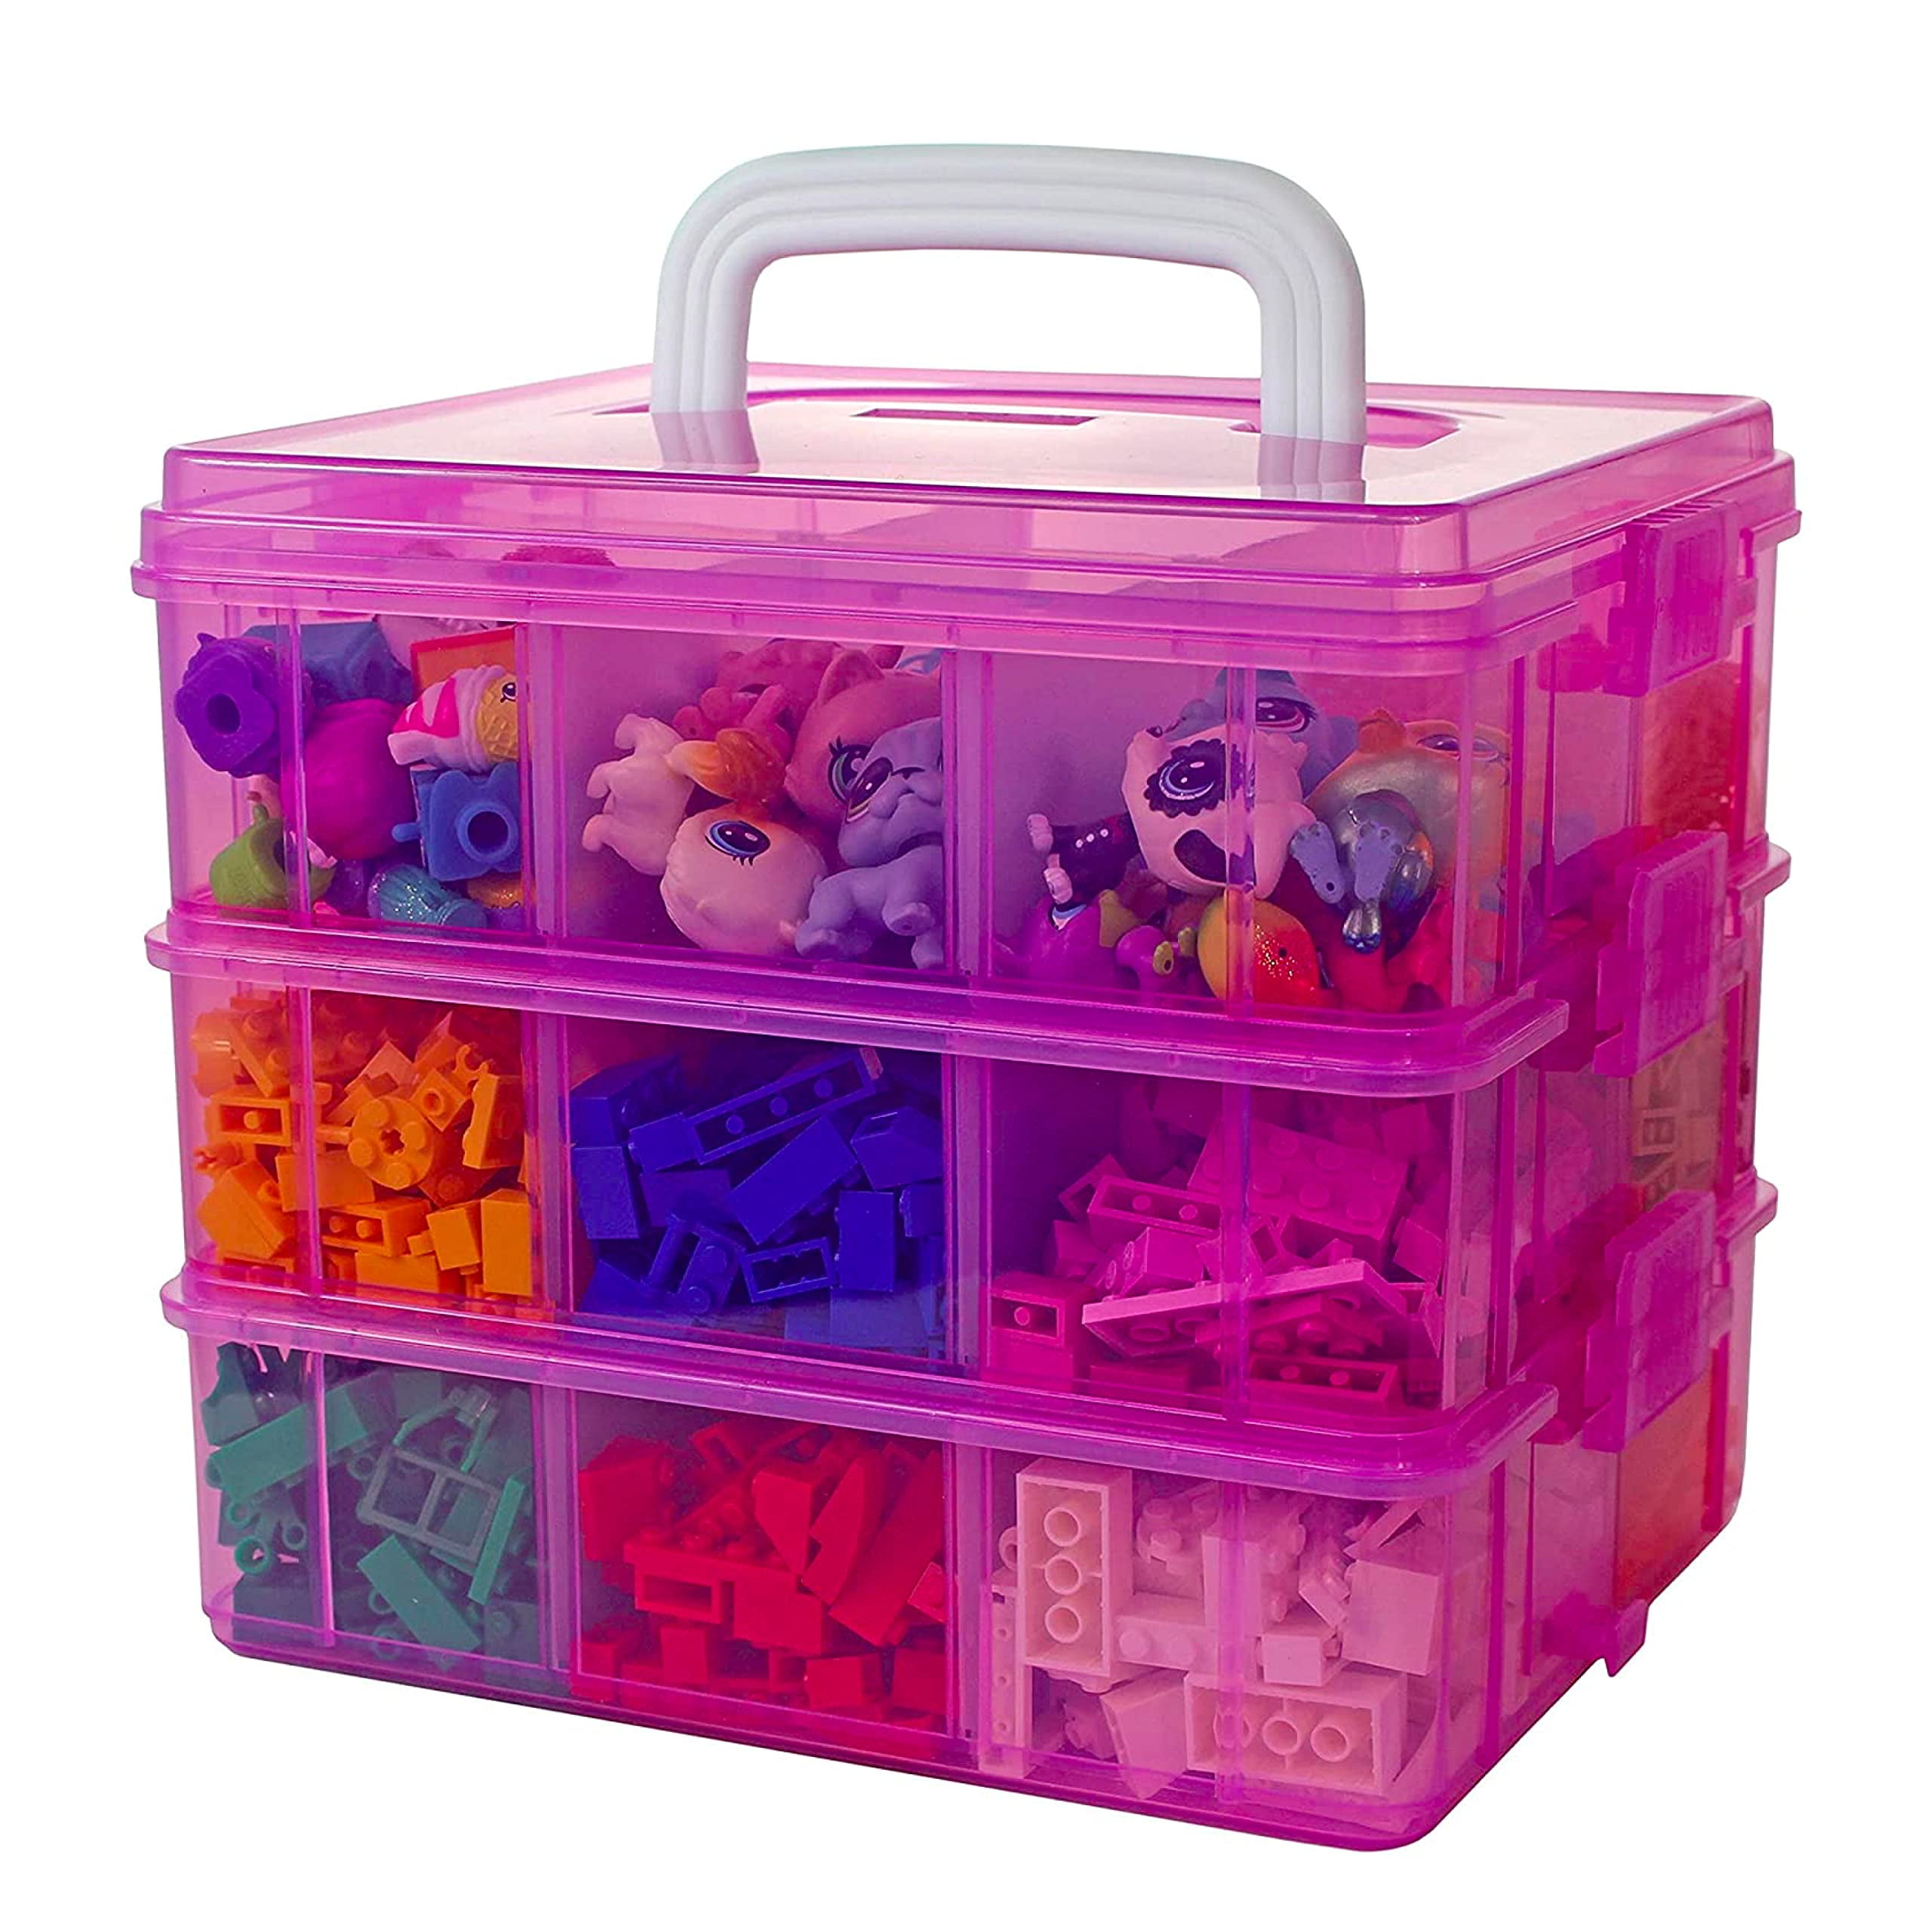 Bins & Things (Pink) - Toy Storage Organiser and Display Case Compatible  with LOL Dolls, Shopkins and LPS Figures - Portable Adjustable Box  w/Carrying Handle : : Home